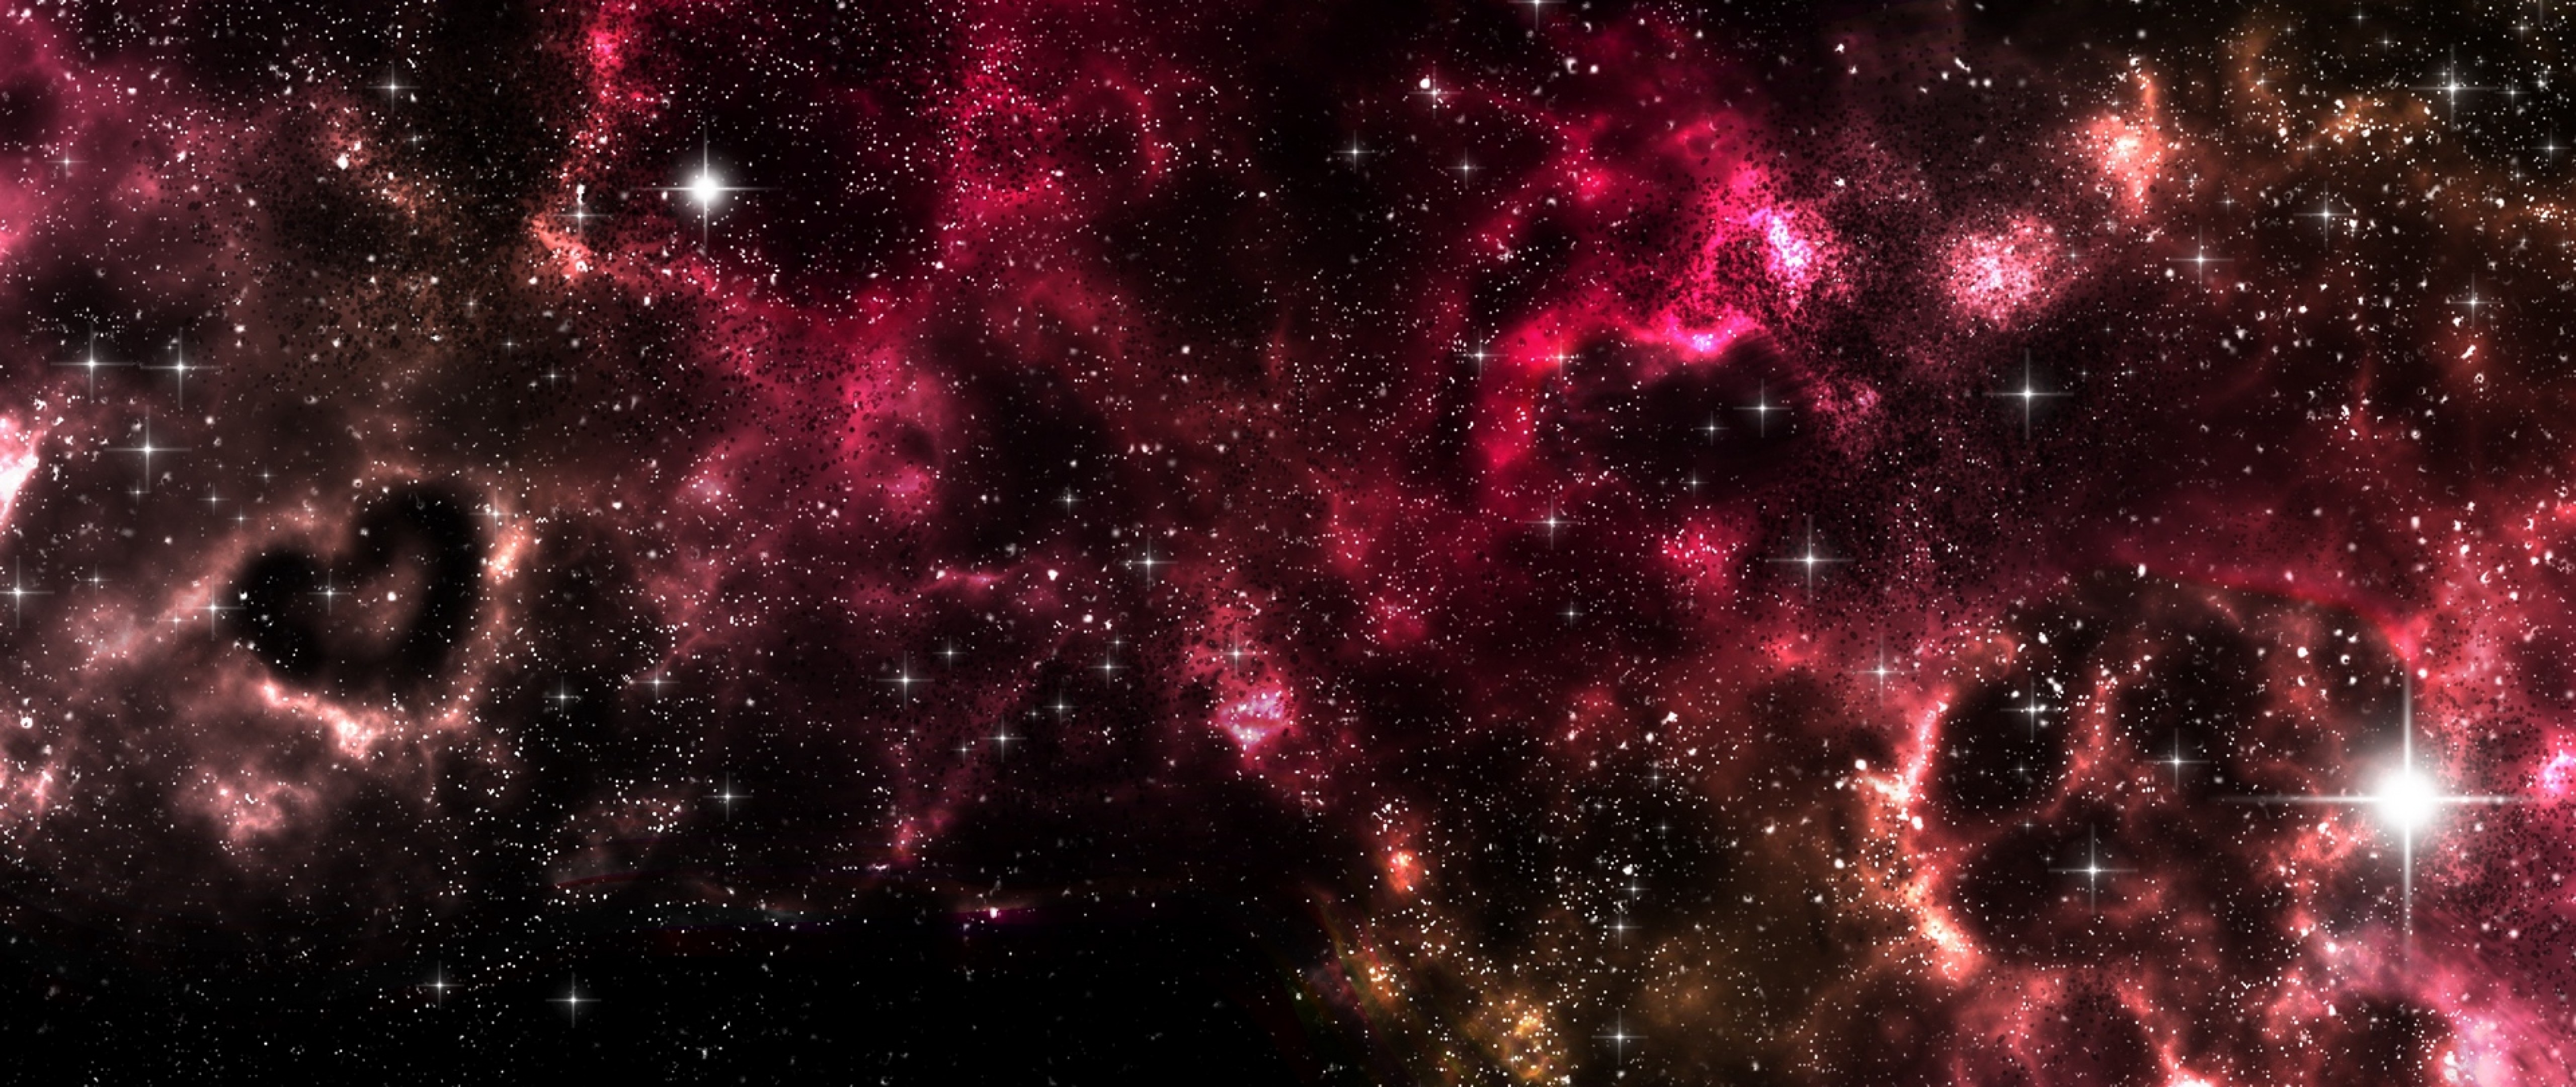 Shiny stars at a red space HD Wallpaper